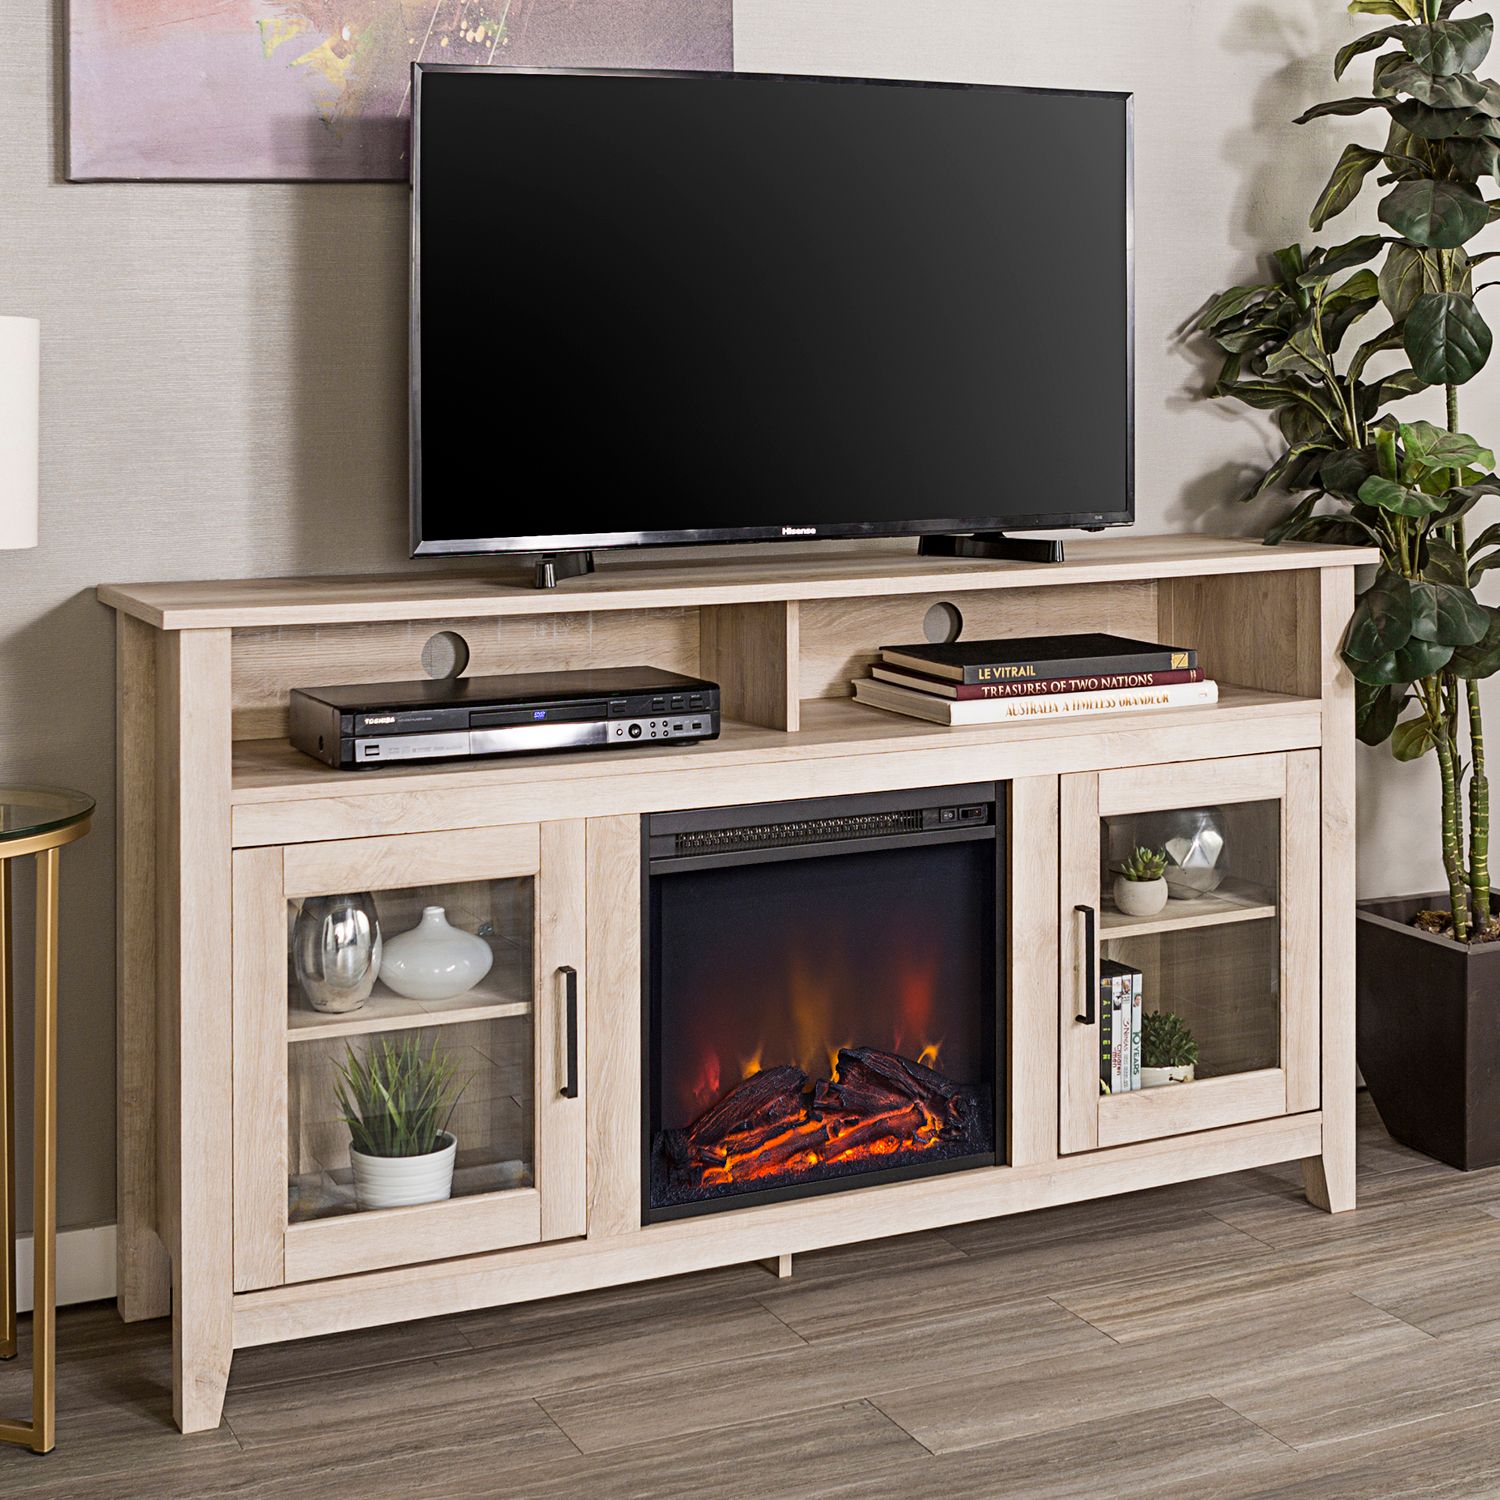 Highboy Wood Fireplace Tv Stand – Pier1 Intended For Wood Highboy Fireplace Tv Stands (View 15 of 20)